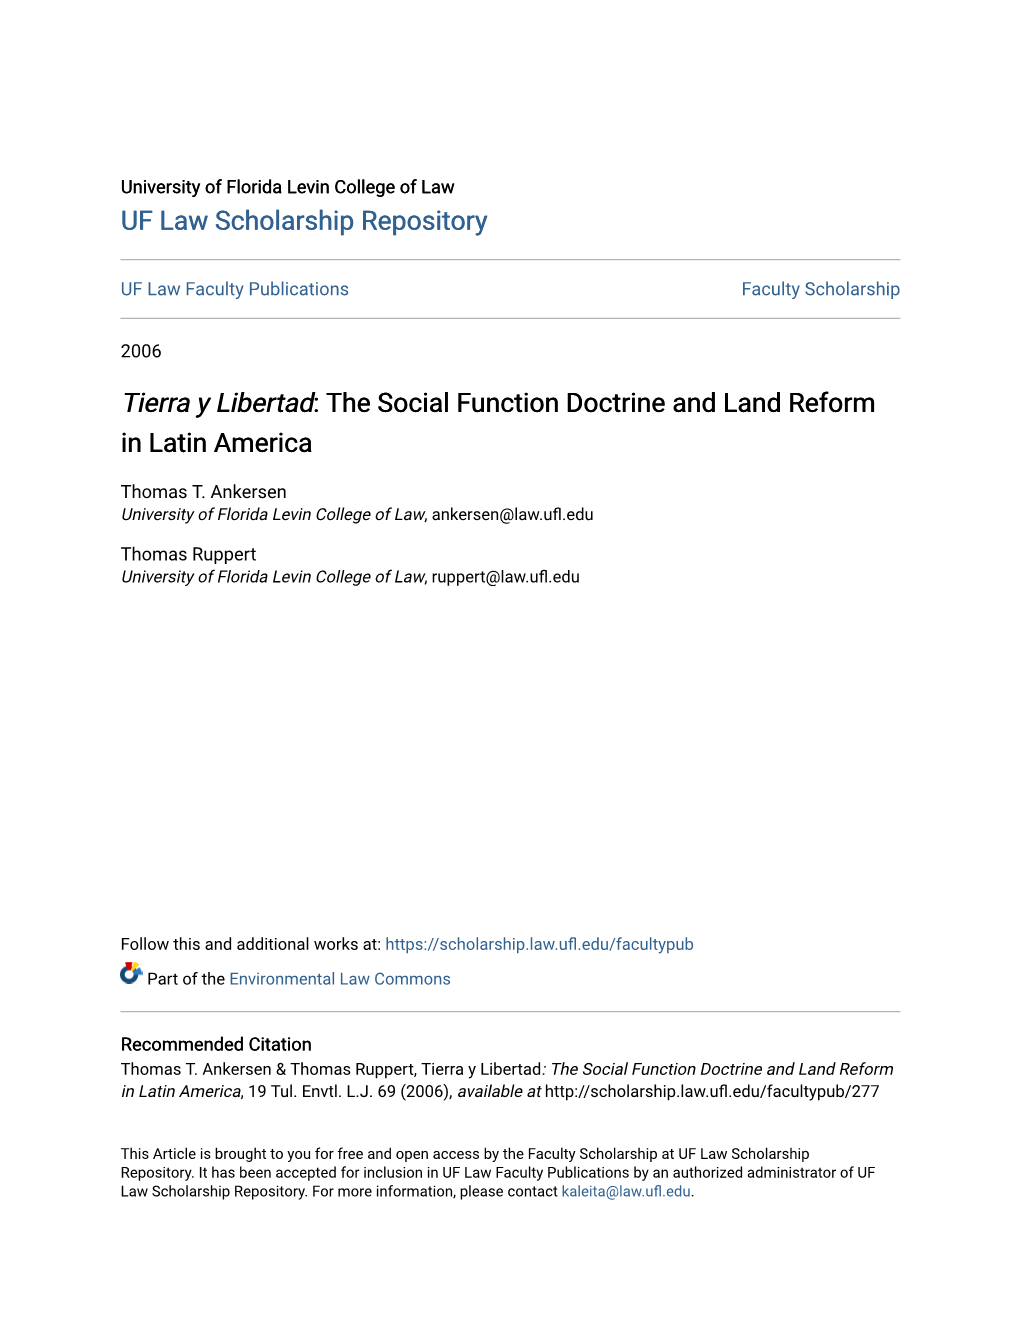 The Social Function Doctrine and Land Reform in Latin America